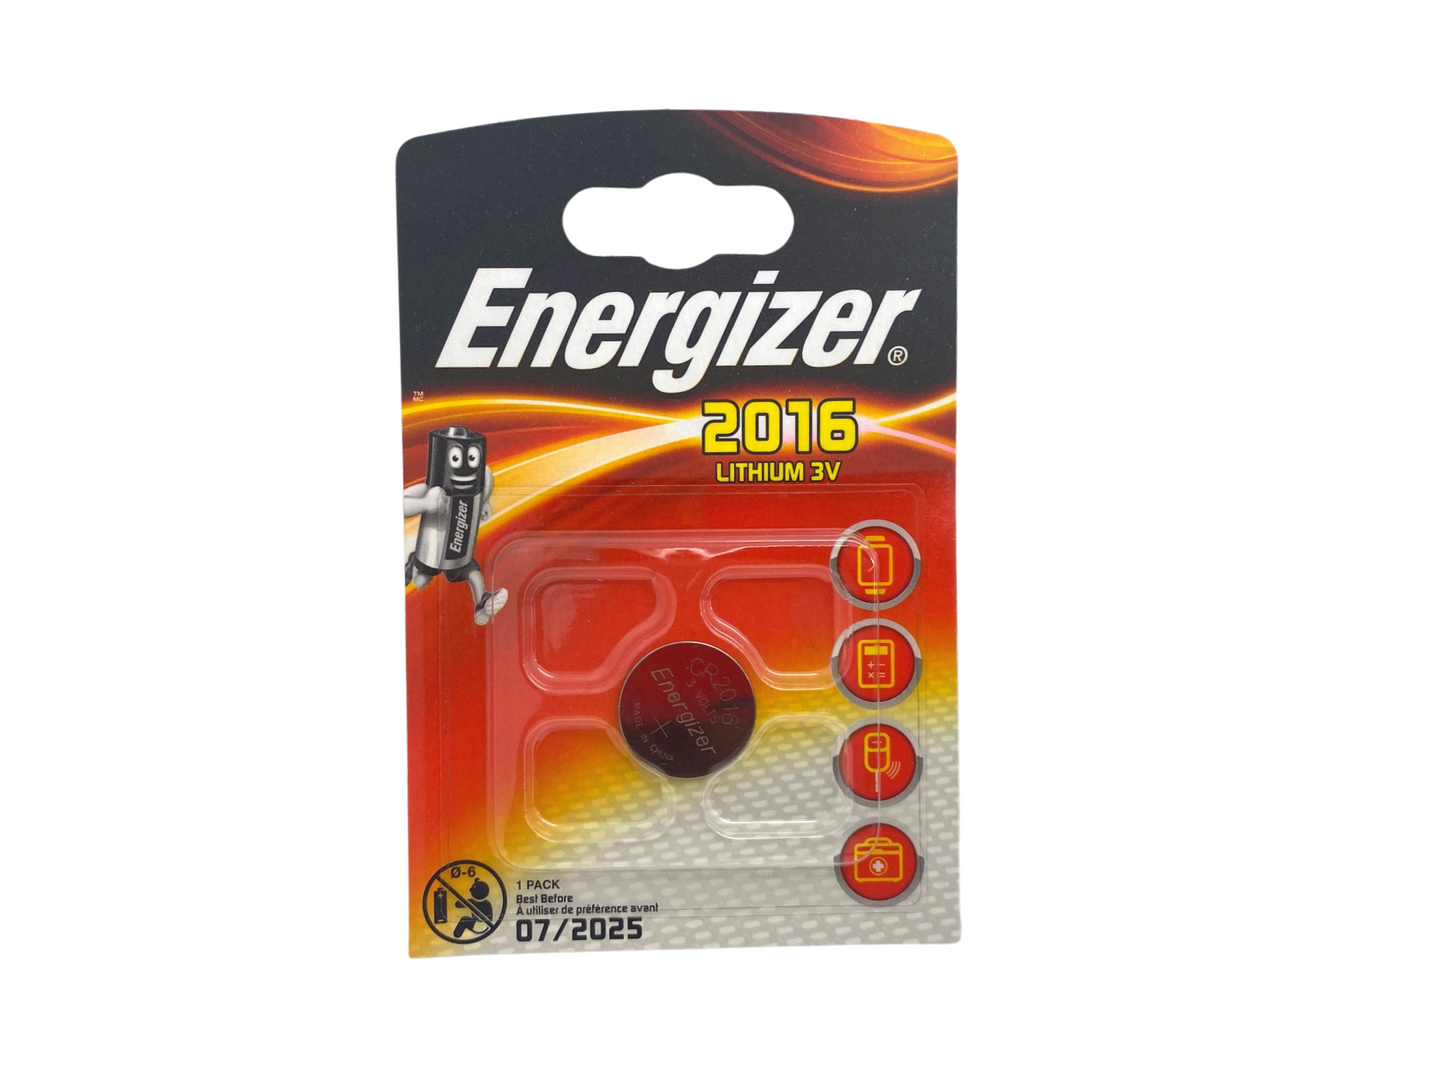 Energizer CR2016 Lithium Cell Battery